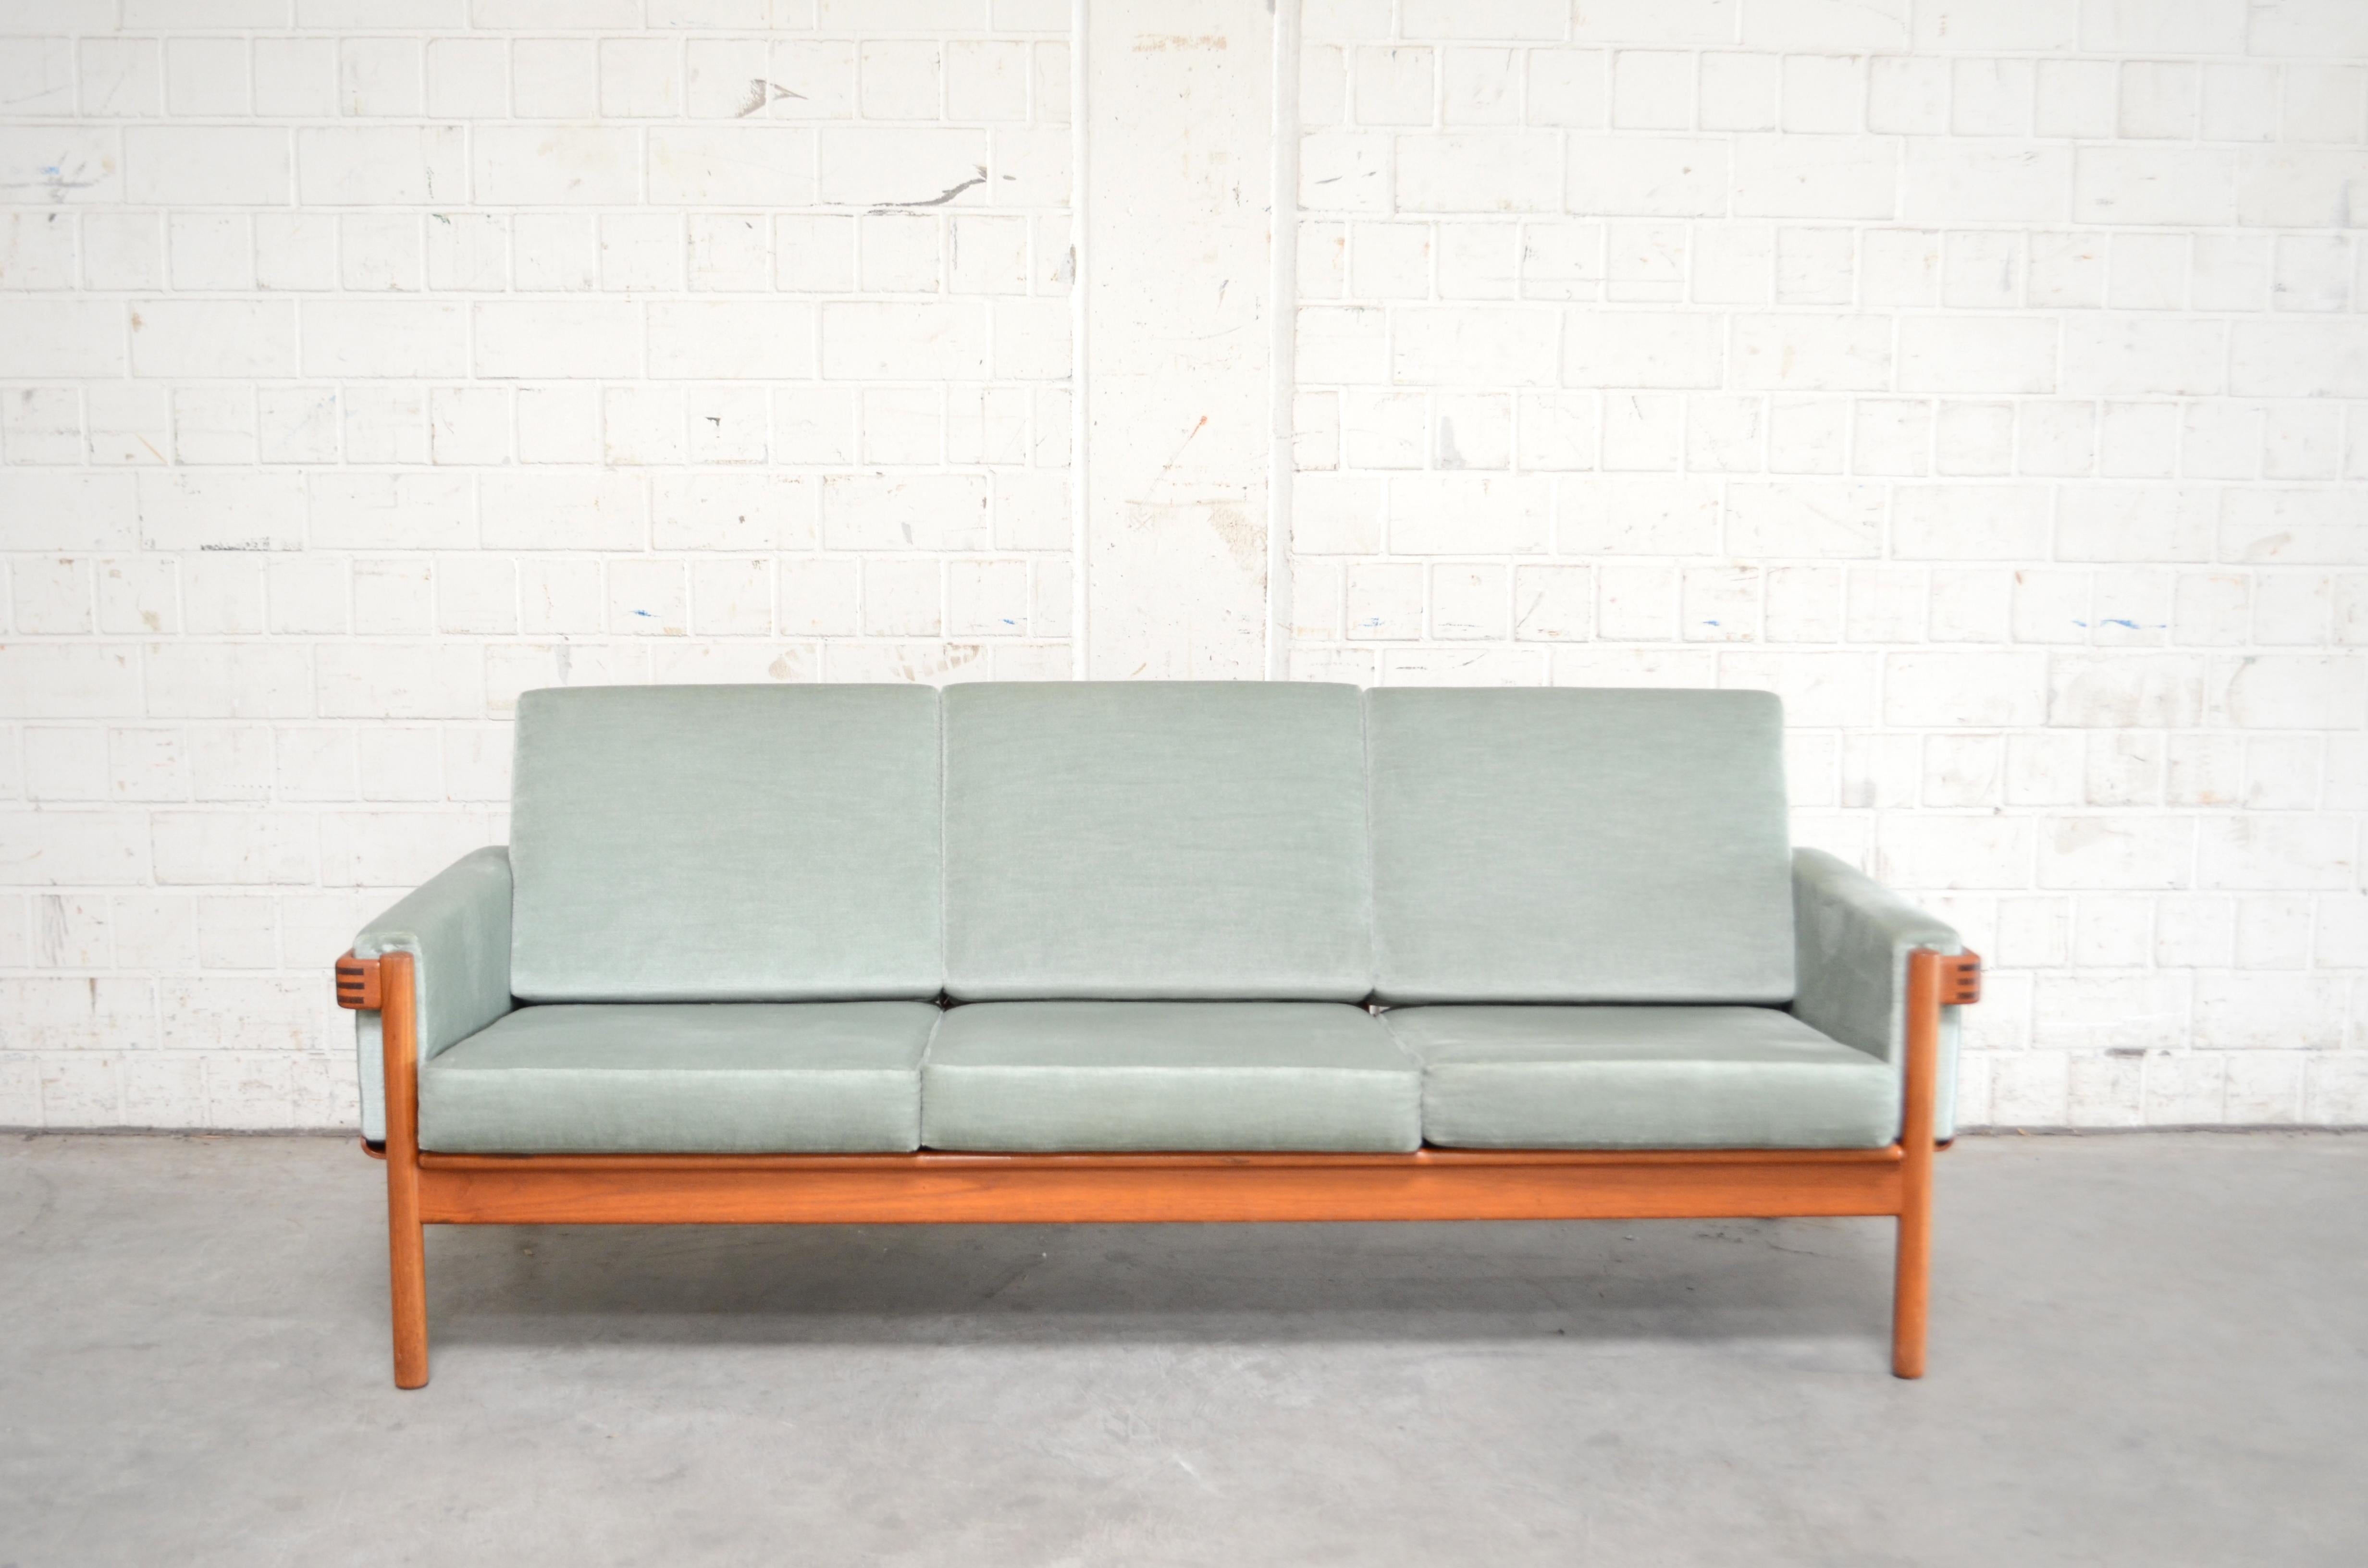 Danish modern sofa by Henry Walter Klein for Bramin.
The frame is made of solid teak wood and has nice details.
The cushions are renewed some years ago in velour fabric pastel colour.
This model from Henry Walter Klein is rare.

 